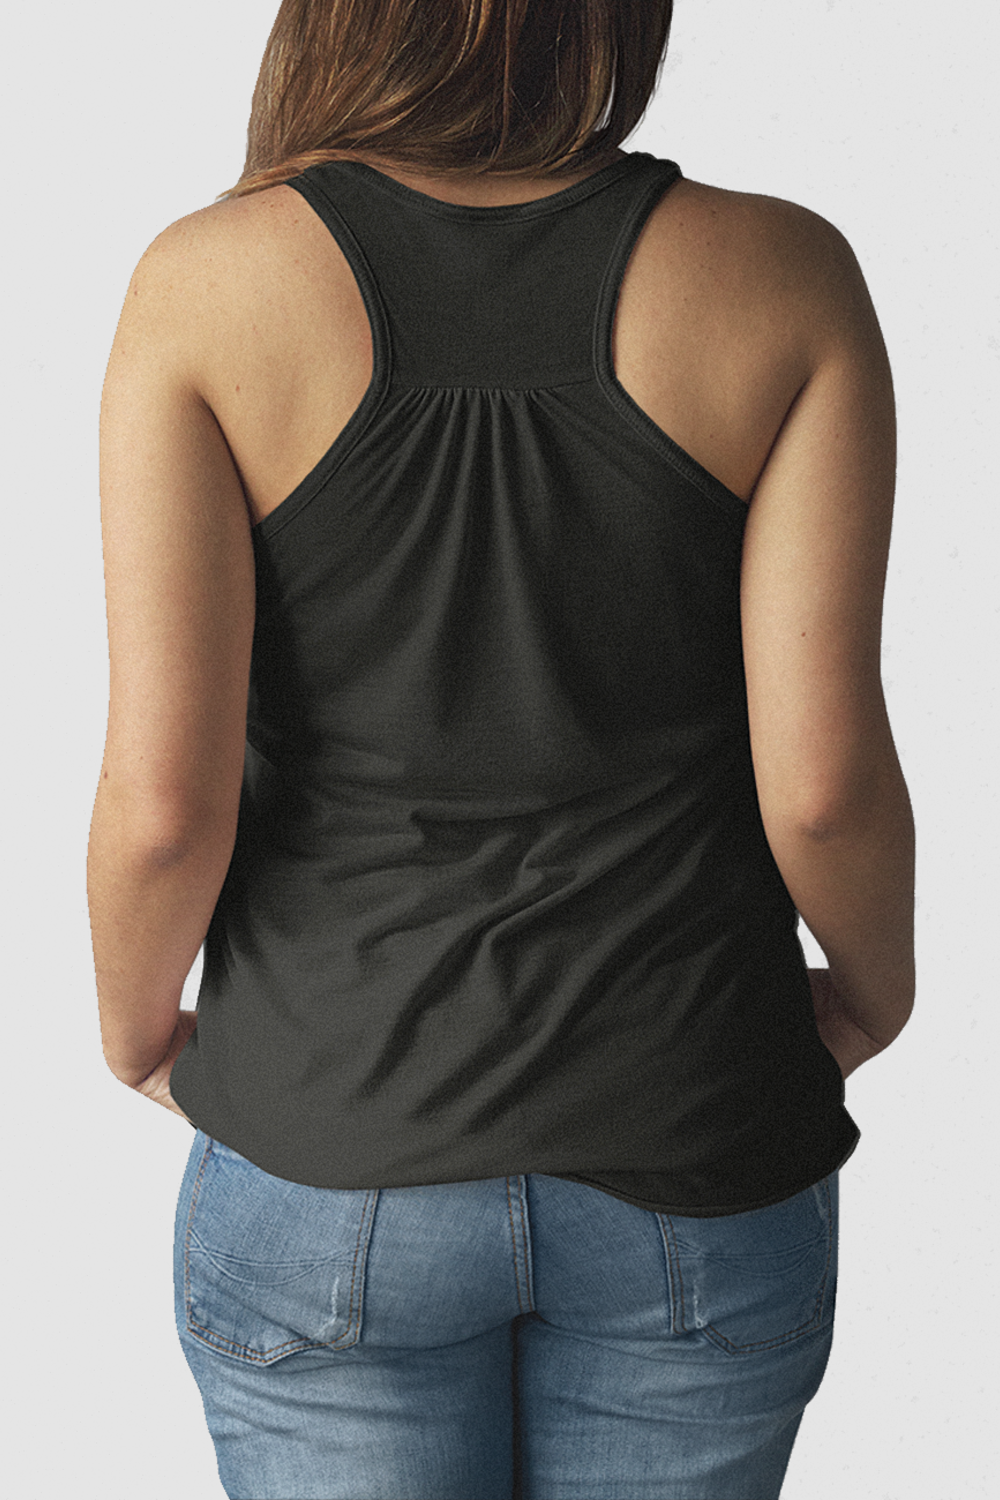 This Is What An Amazing Mom Looks Like Women's Cut Racerback Tank Top